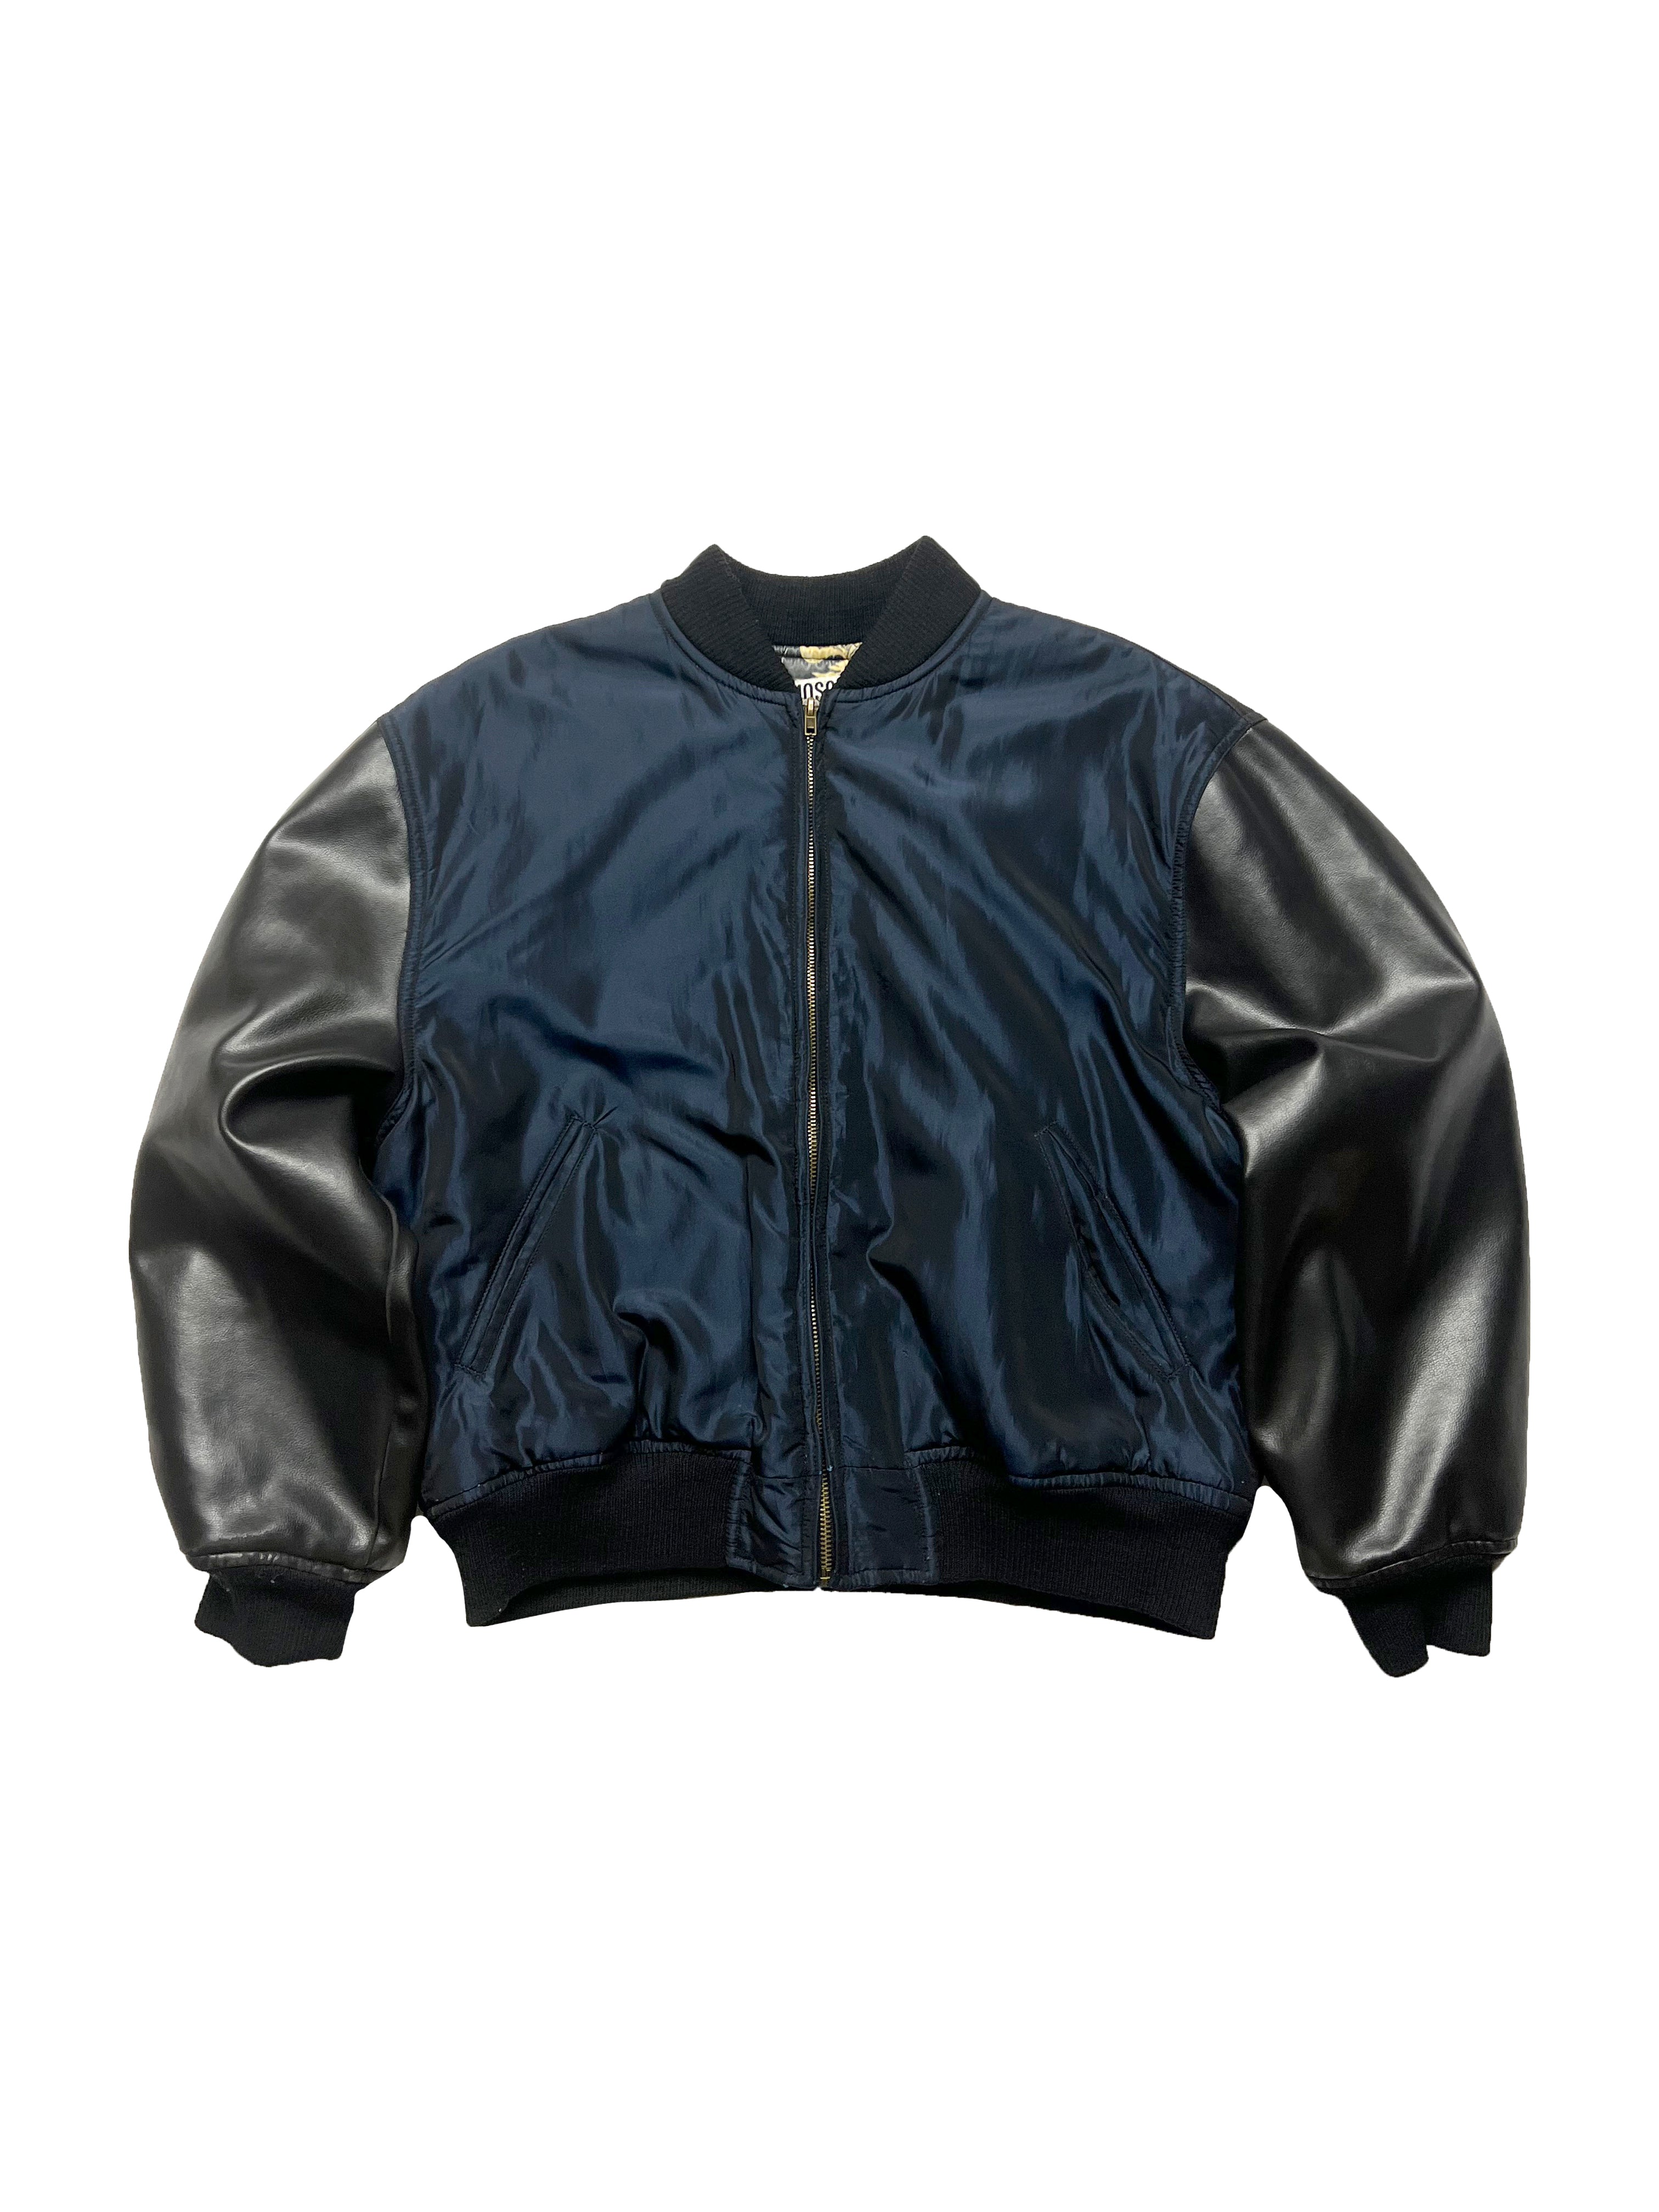 Moschino Jeans Spell Out Bomber Jacket 90's